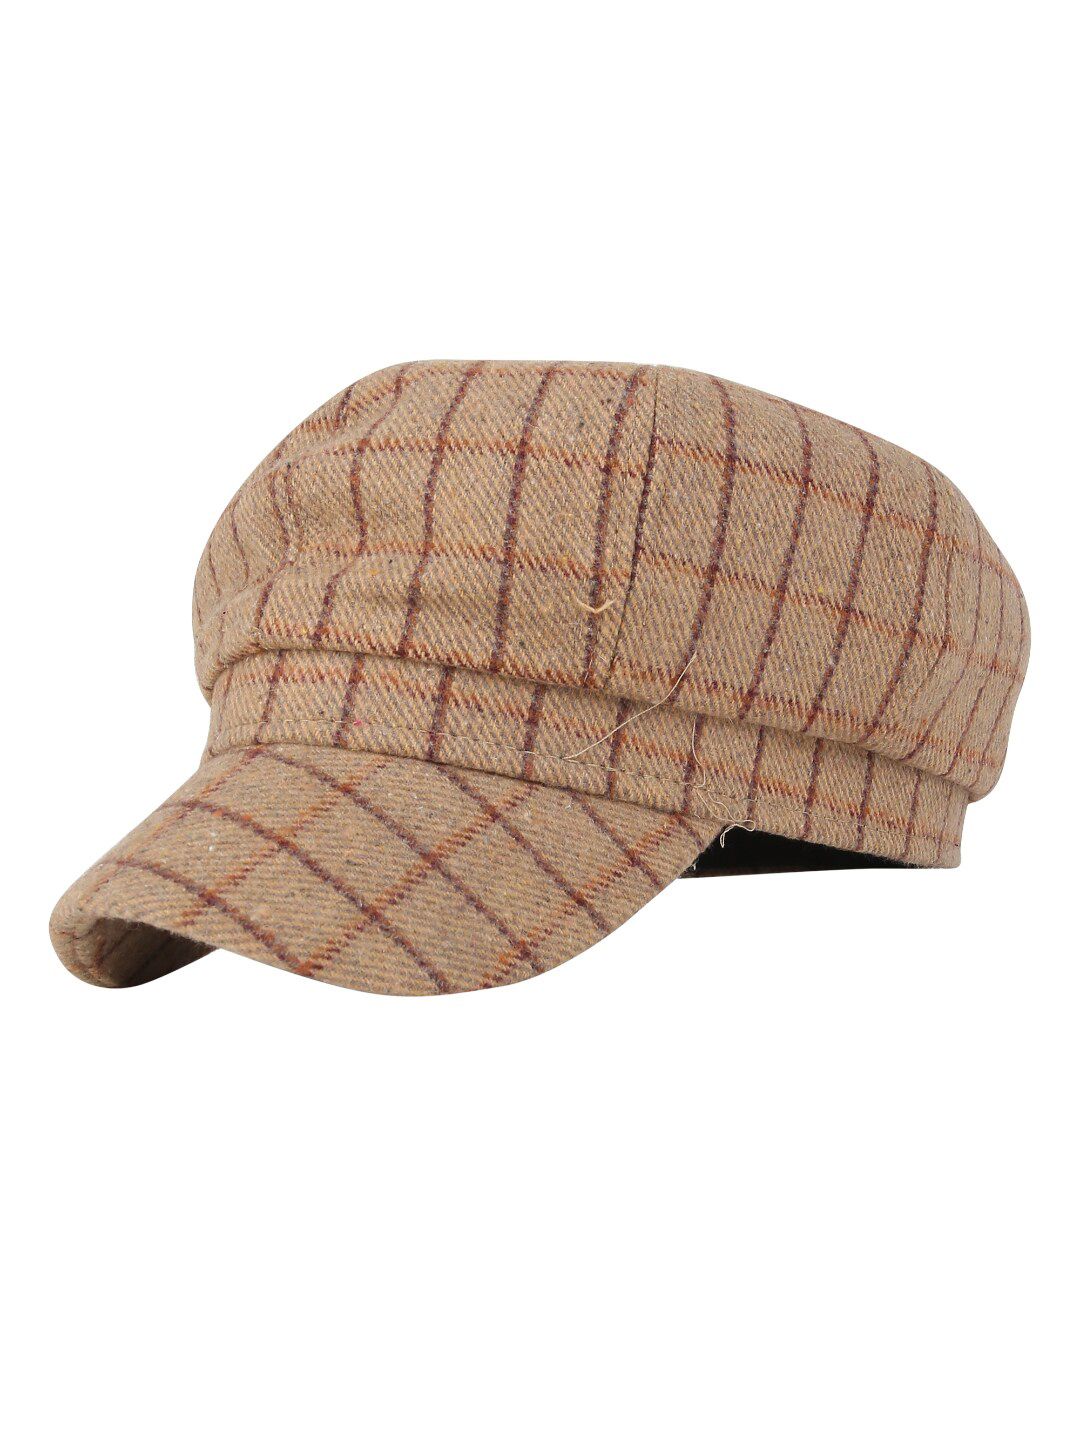 iSWEVEN Unisex Brown Checked Cotton Ascot Cap Price in India